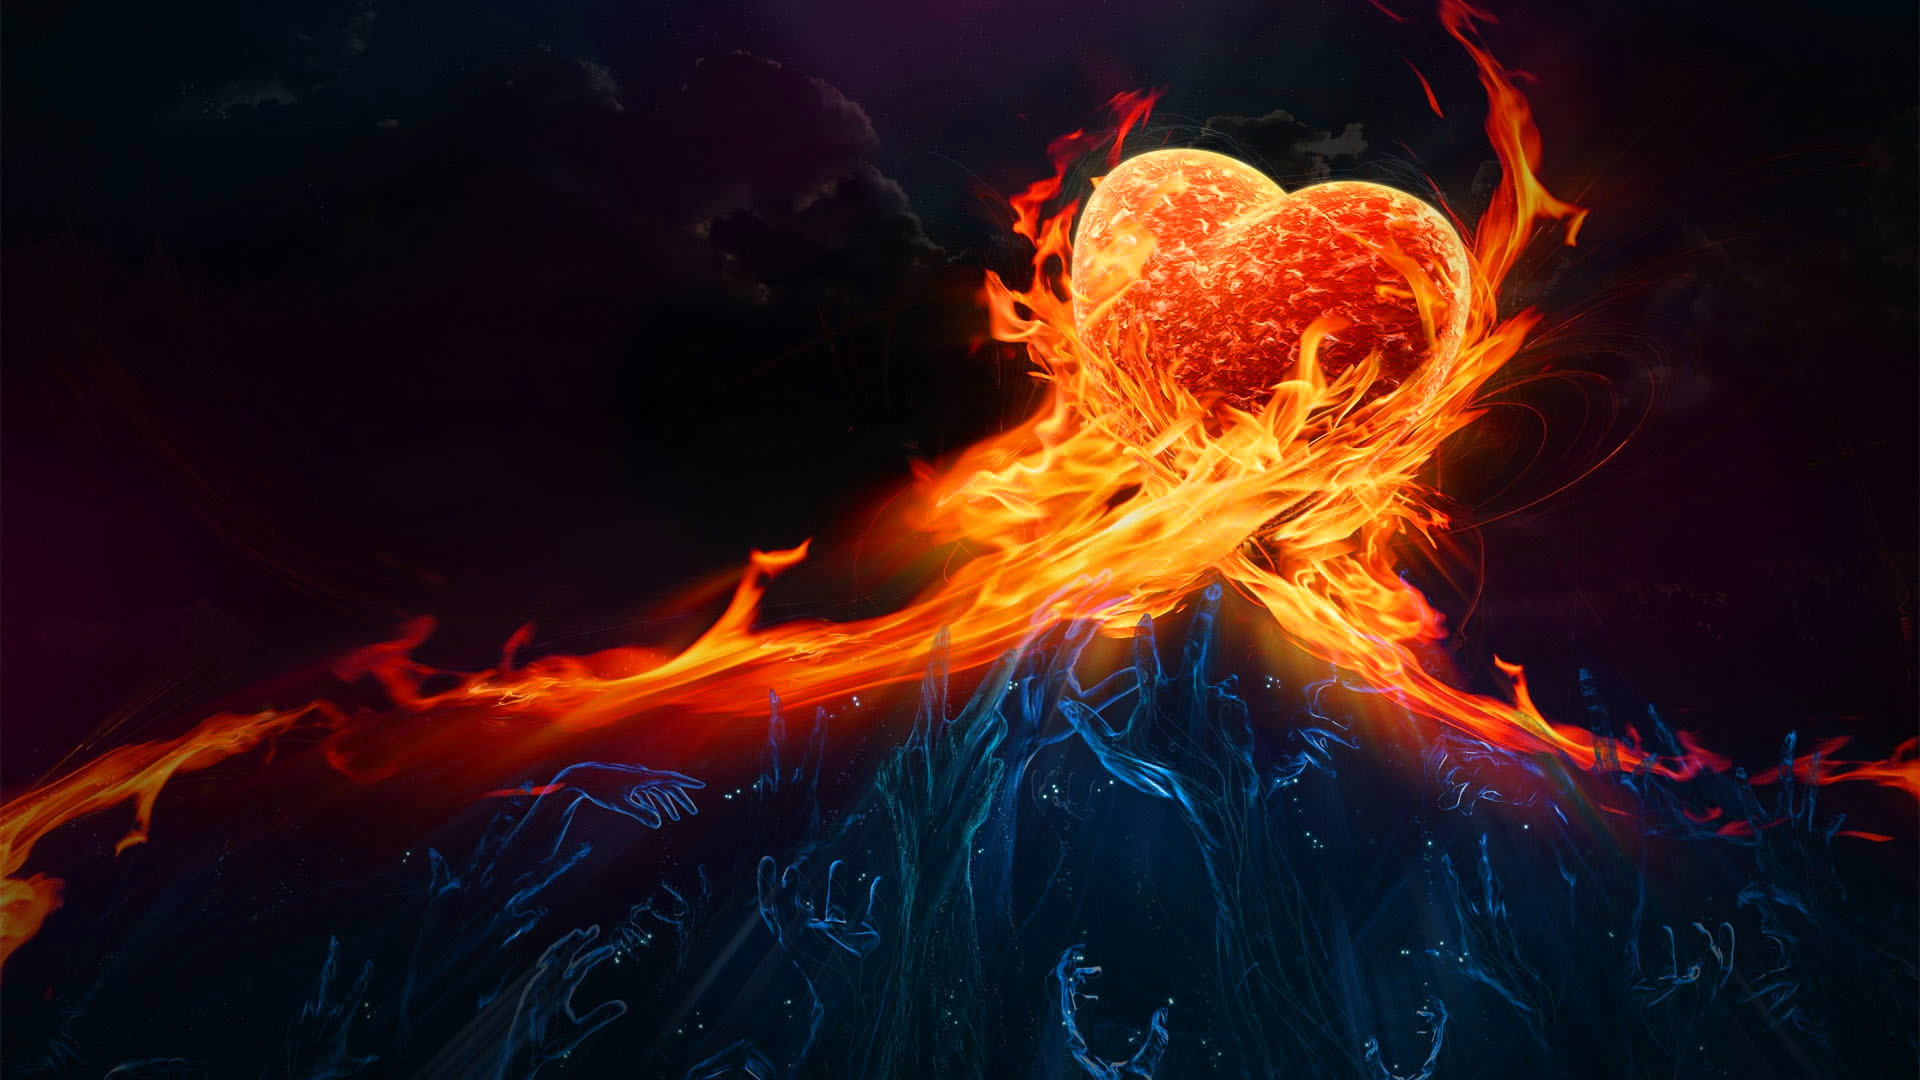 1920x1080 Icy hands reaching for the flaming heart Wallpaper